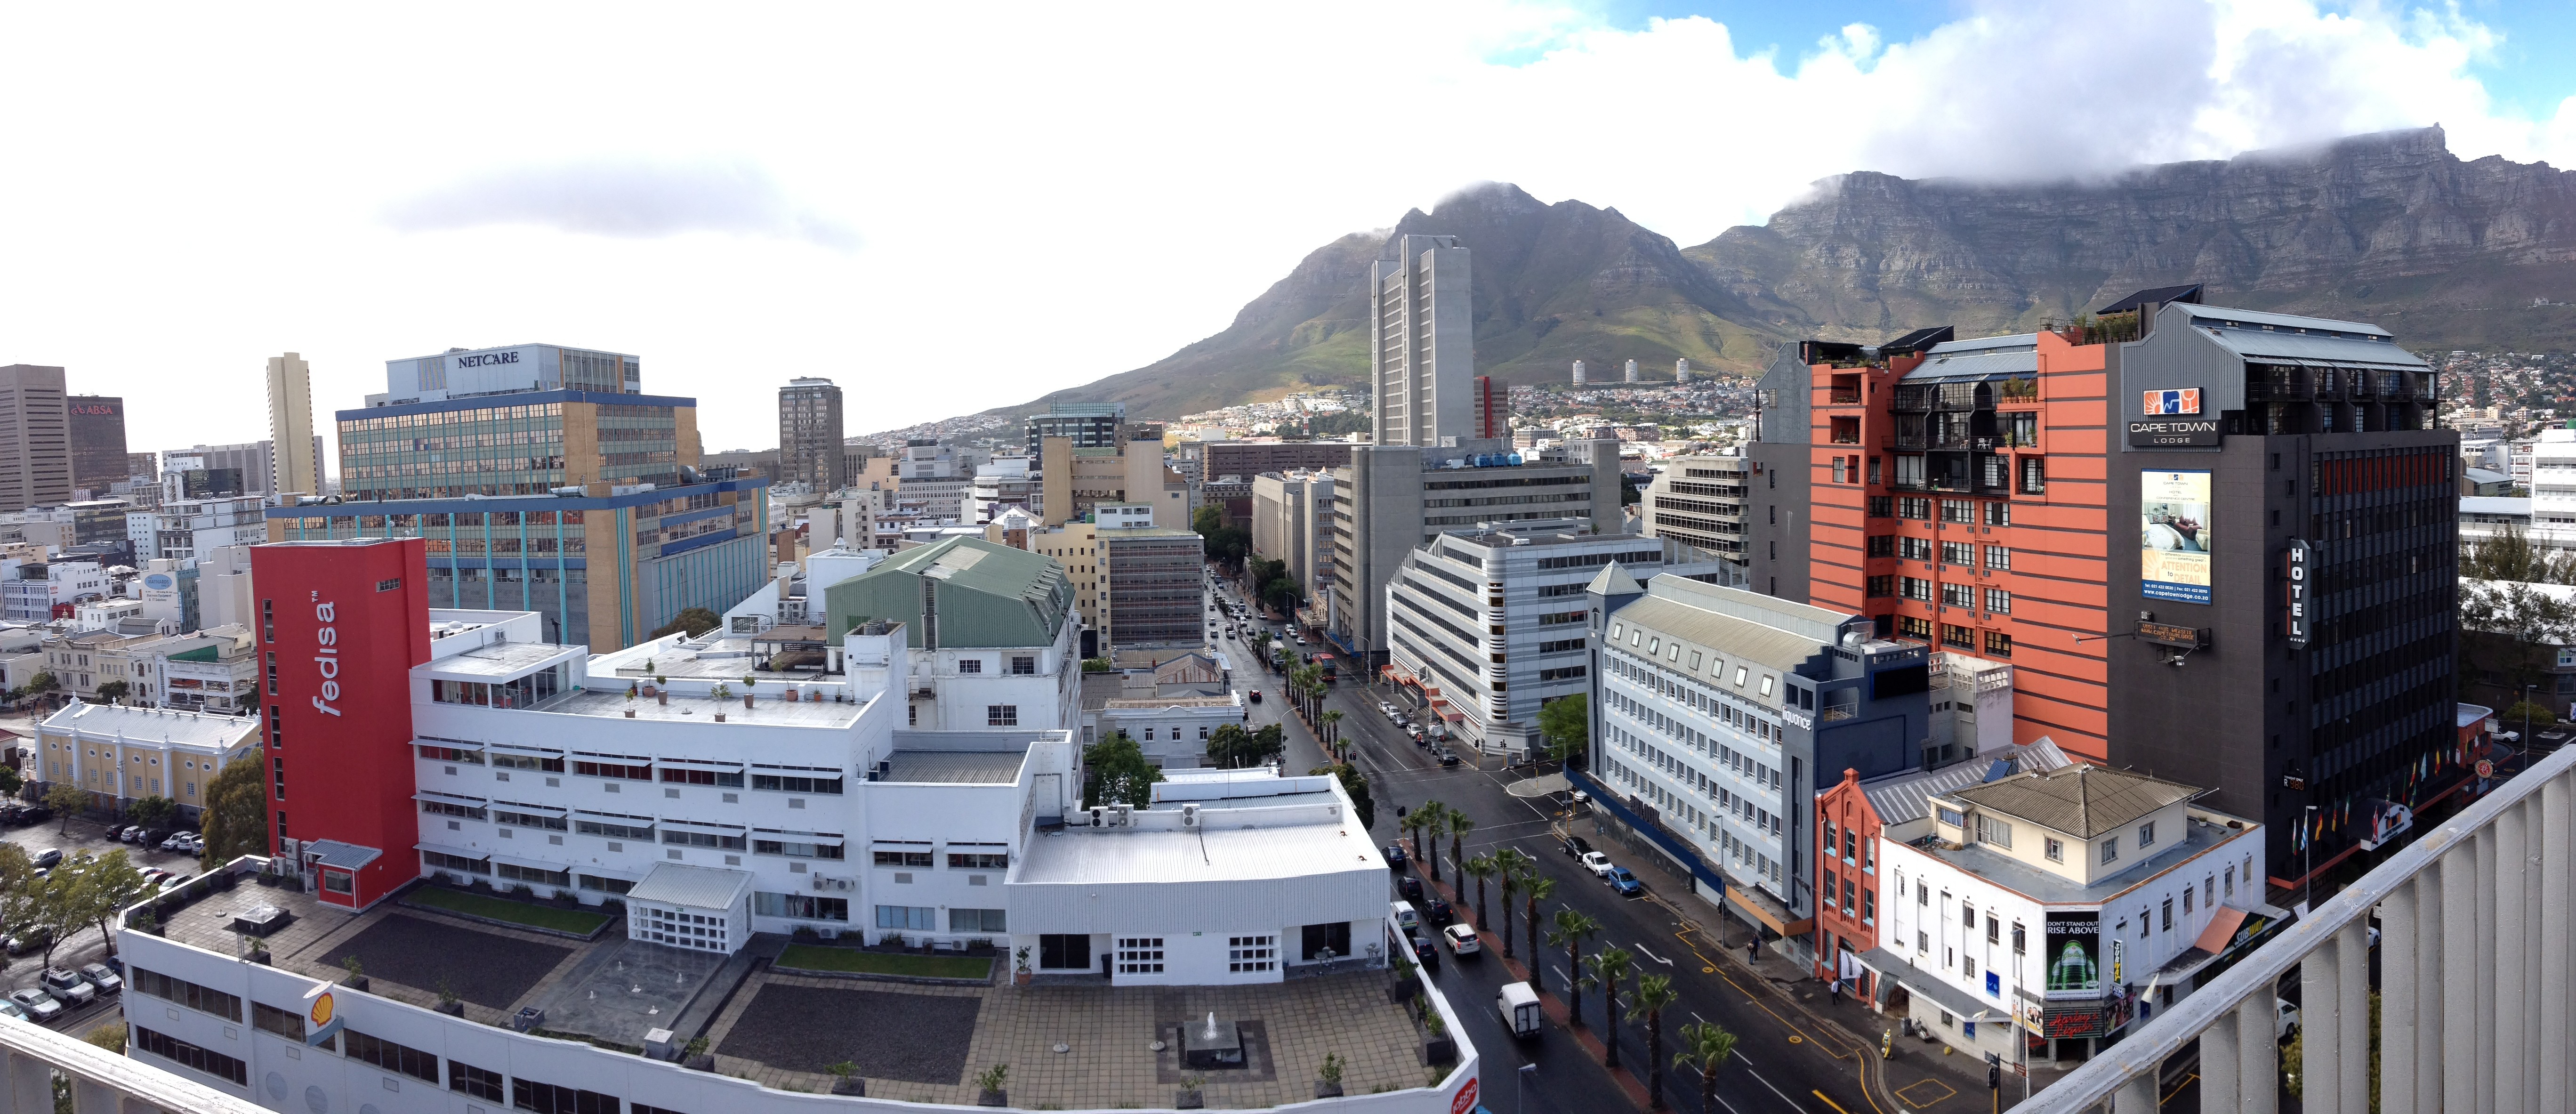 Cape Town: Fascinating Facts About The City